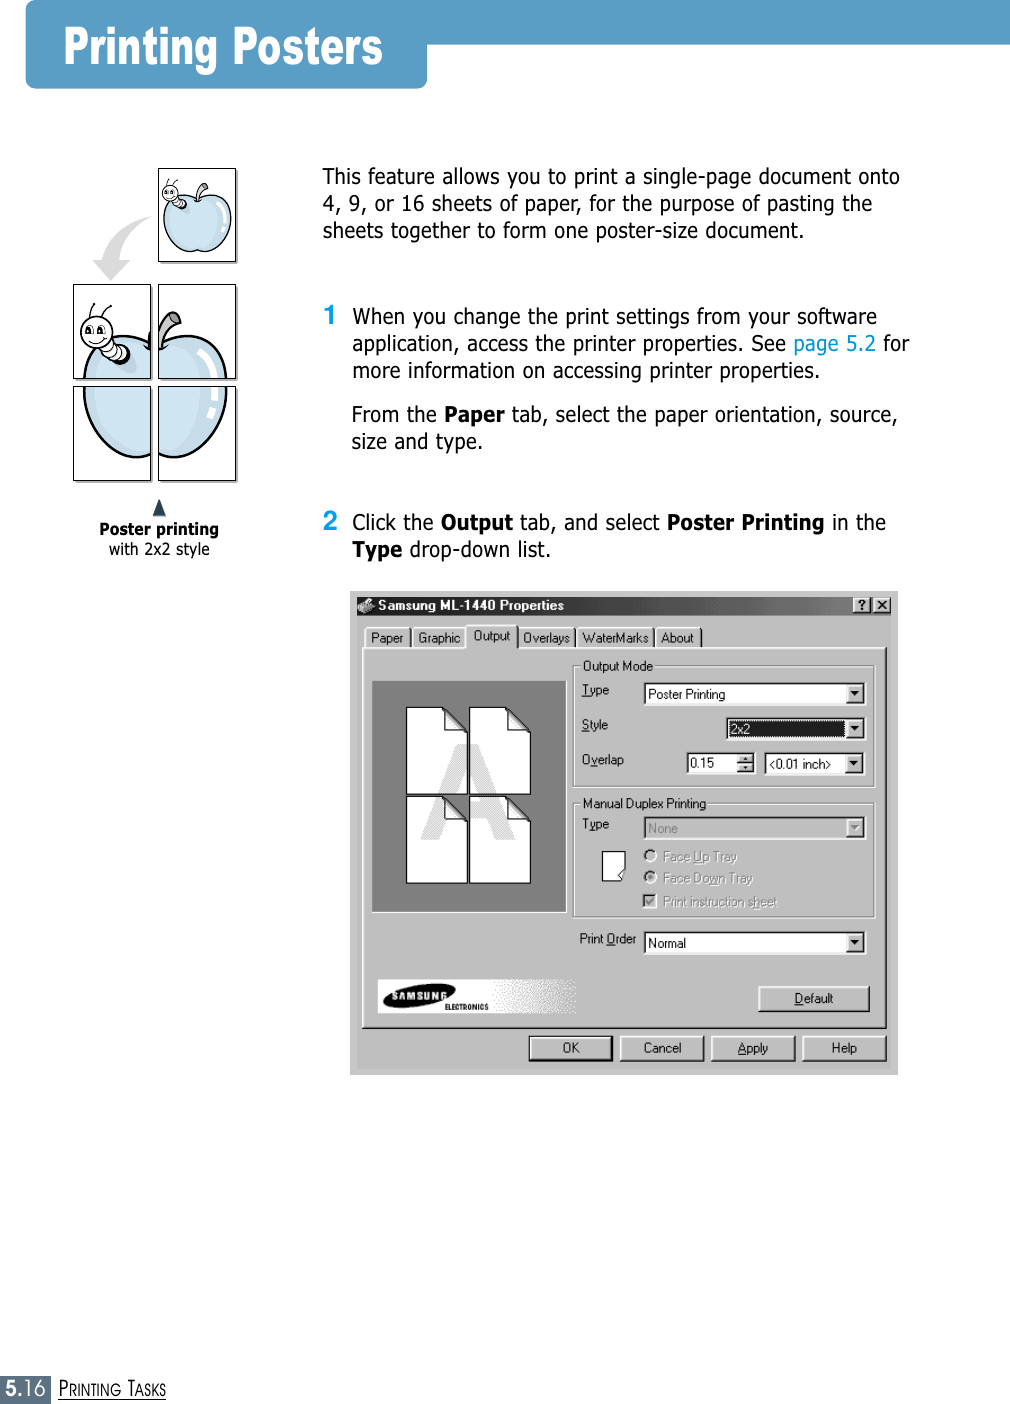 5.16PRINTING TASKSPrinting PostersThis feature allows you to print a single-page document onto4, 9, or 16 sheets of paper, for the purpose of pasting thesheets together to form one poster-size document.1When you change the print settings from your softwareapplication, access the printer properties. See page 5.2 formore information on accessing printer properties.From the Paper tab, select the paper orientation, source,size and type.2Click the Output tab, and select Poster Printing in theType drop-down list.➐➐➐➐Poster printingwith 2x2 style